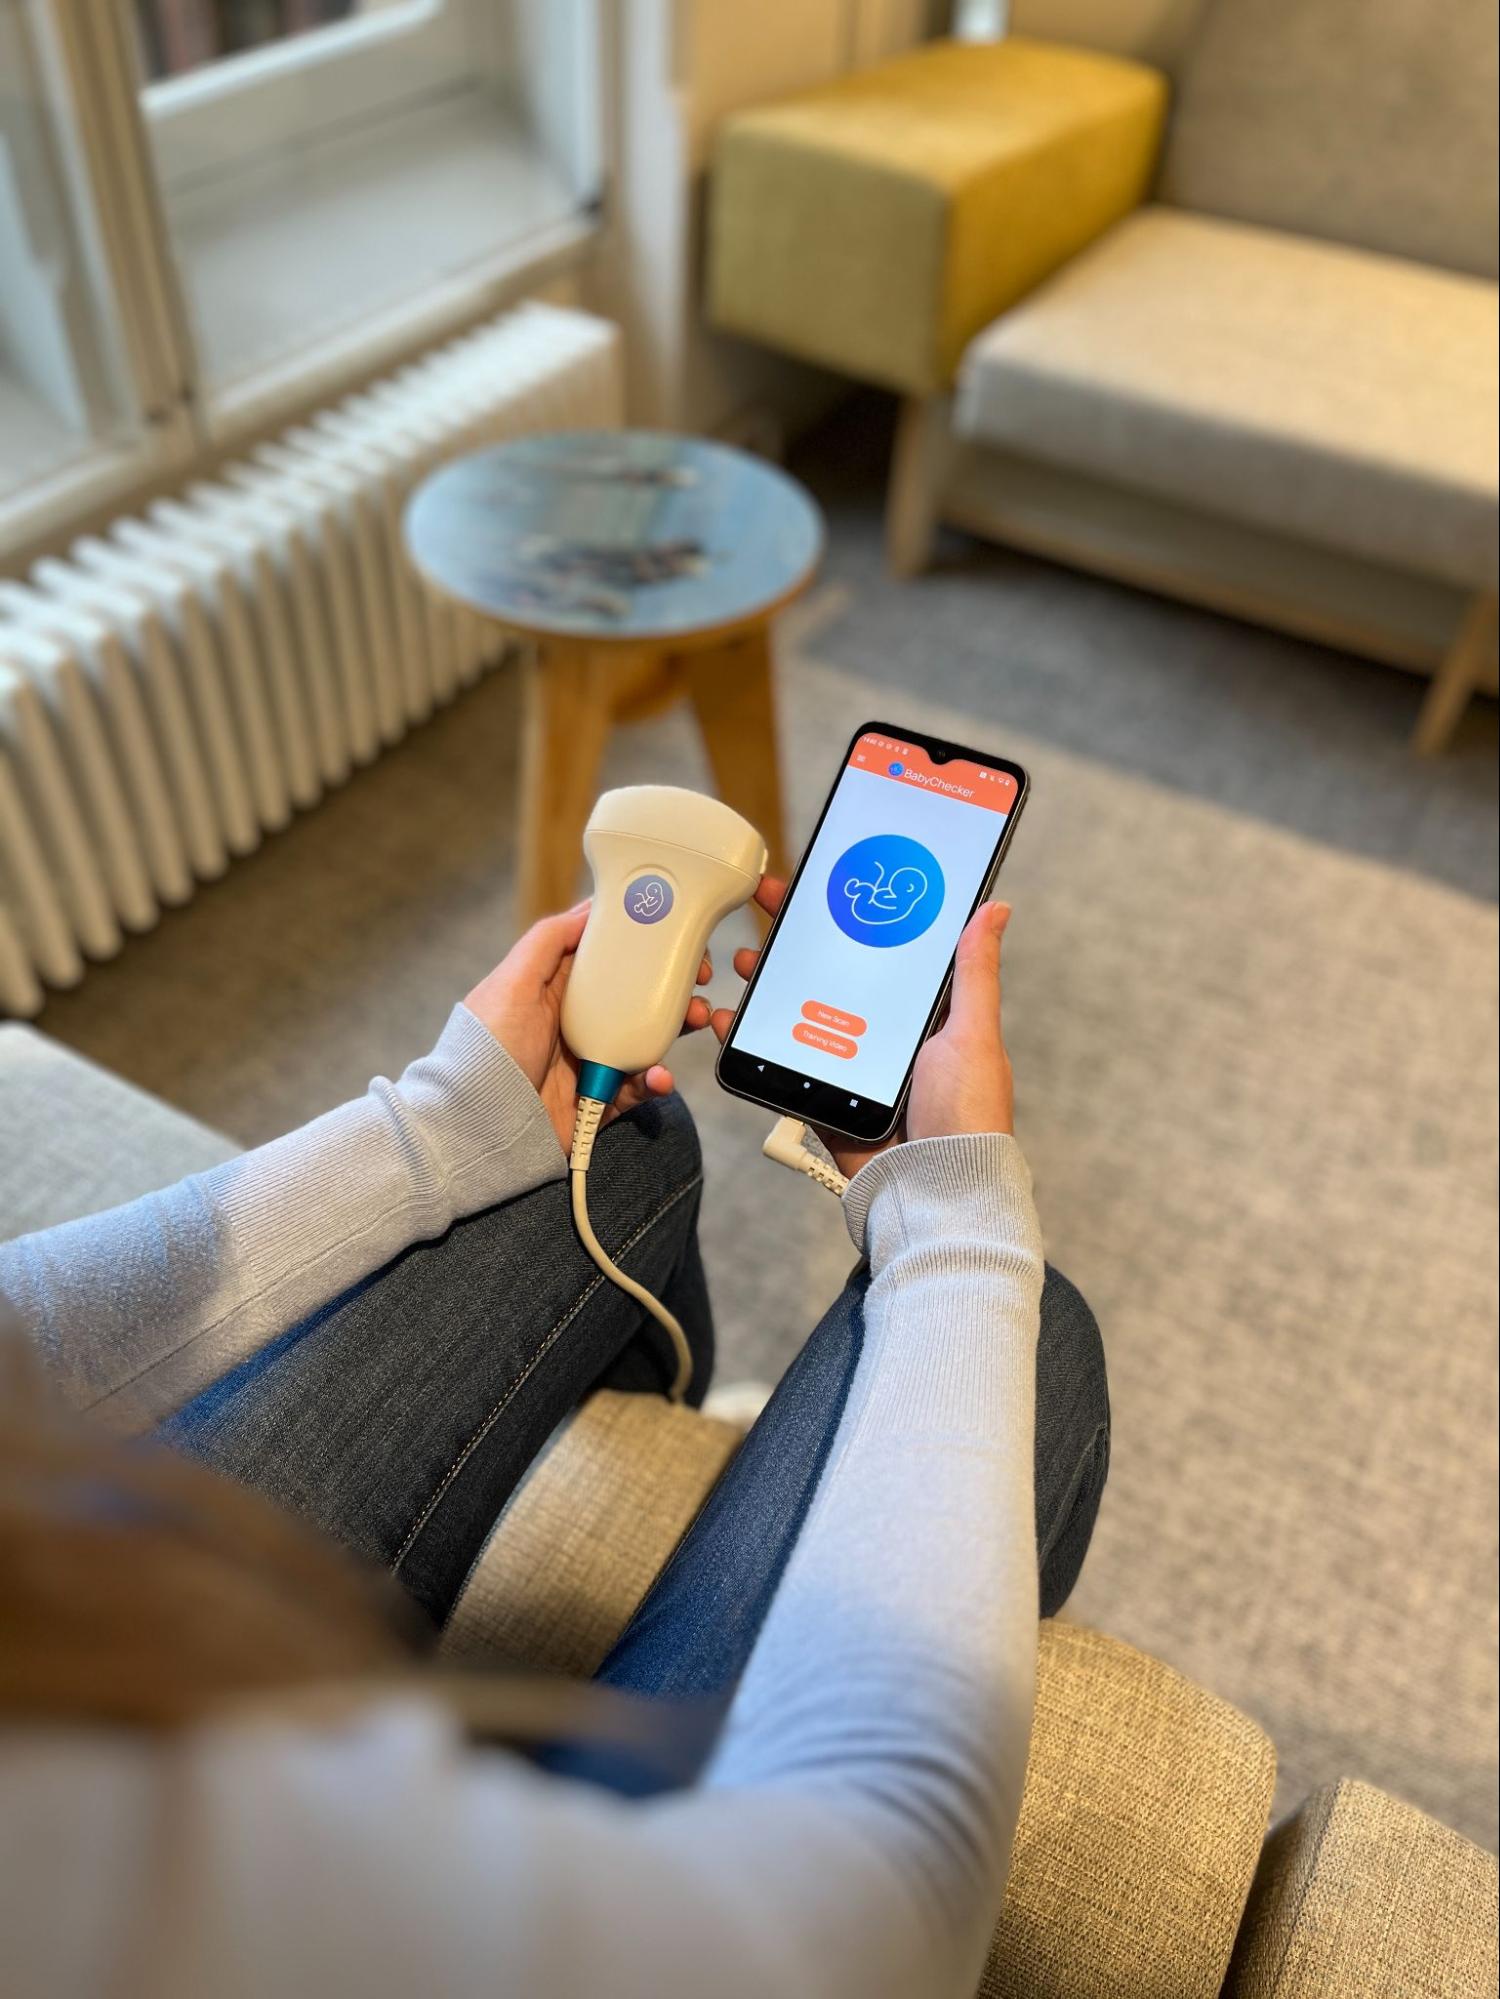 BabyChecker: Fairphone with installed app and connected ultrasound probe